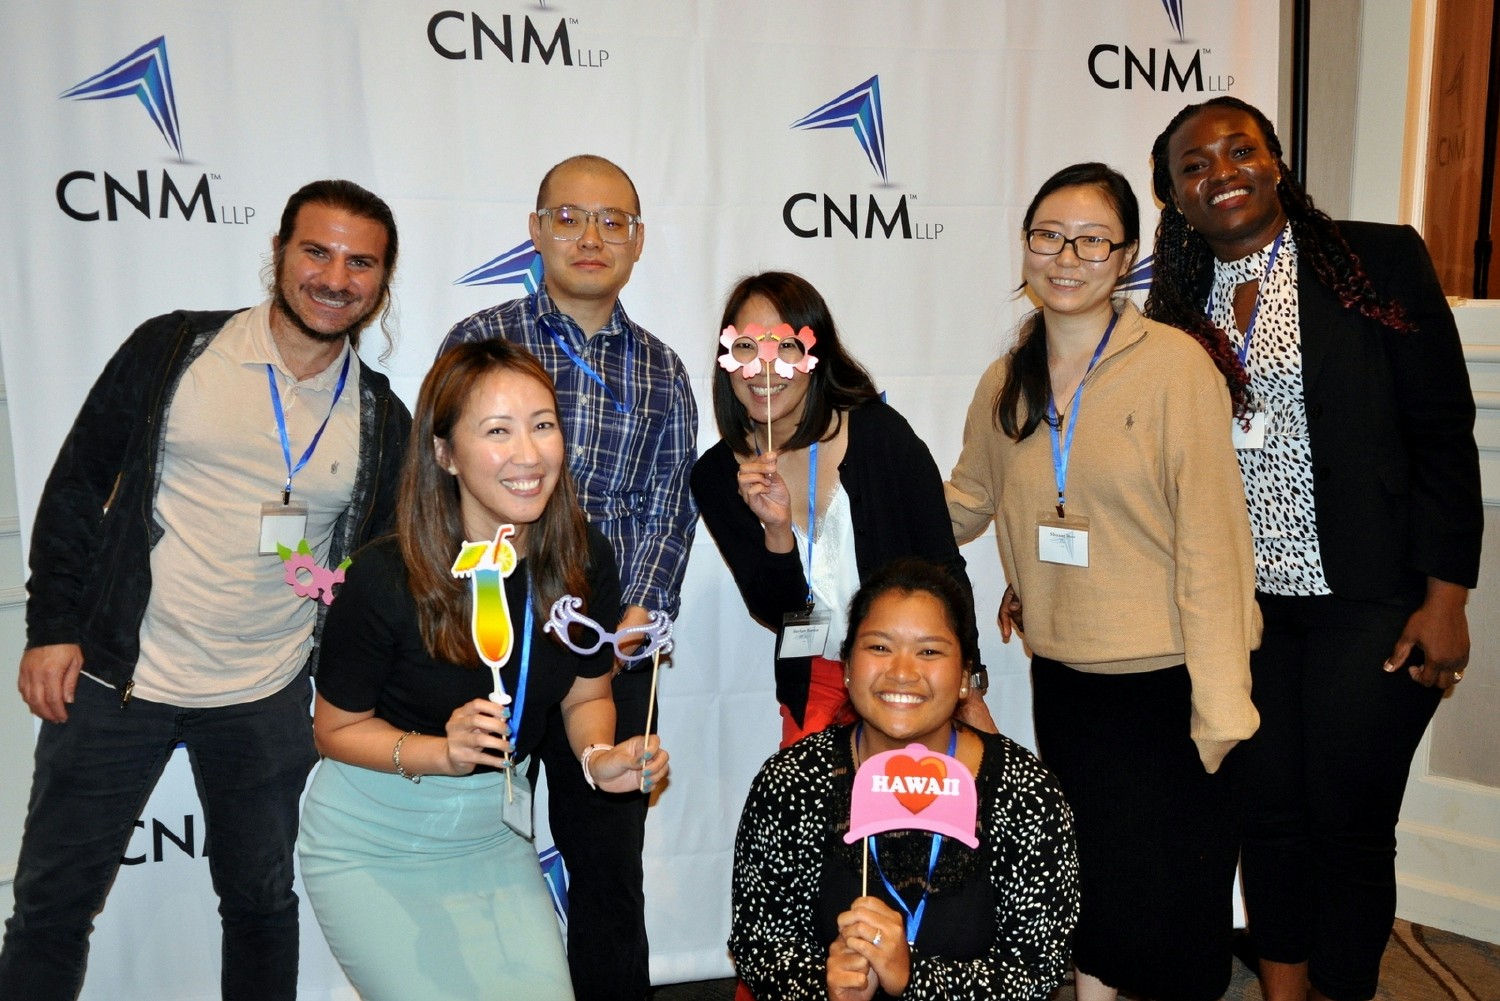 CNM Professionals bonding after our annual Learning & Development Event, CNM University 